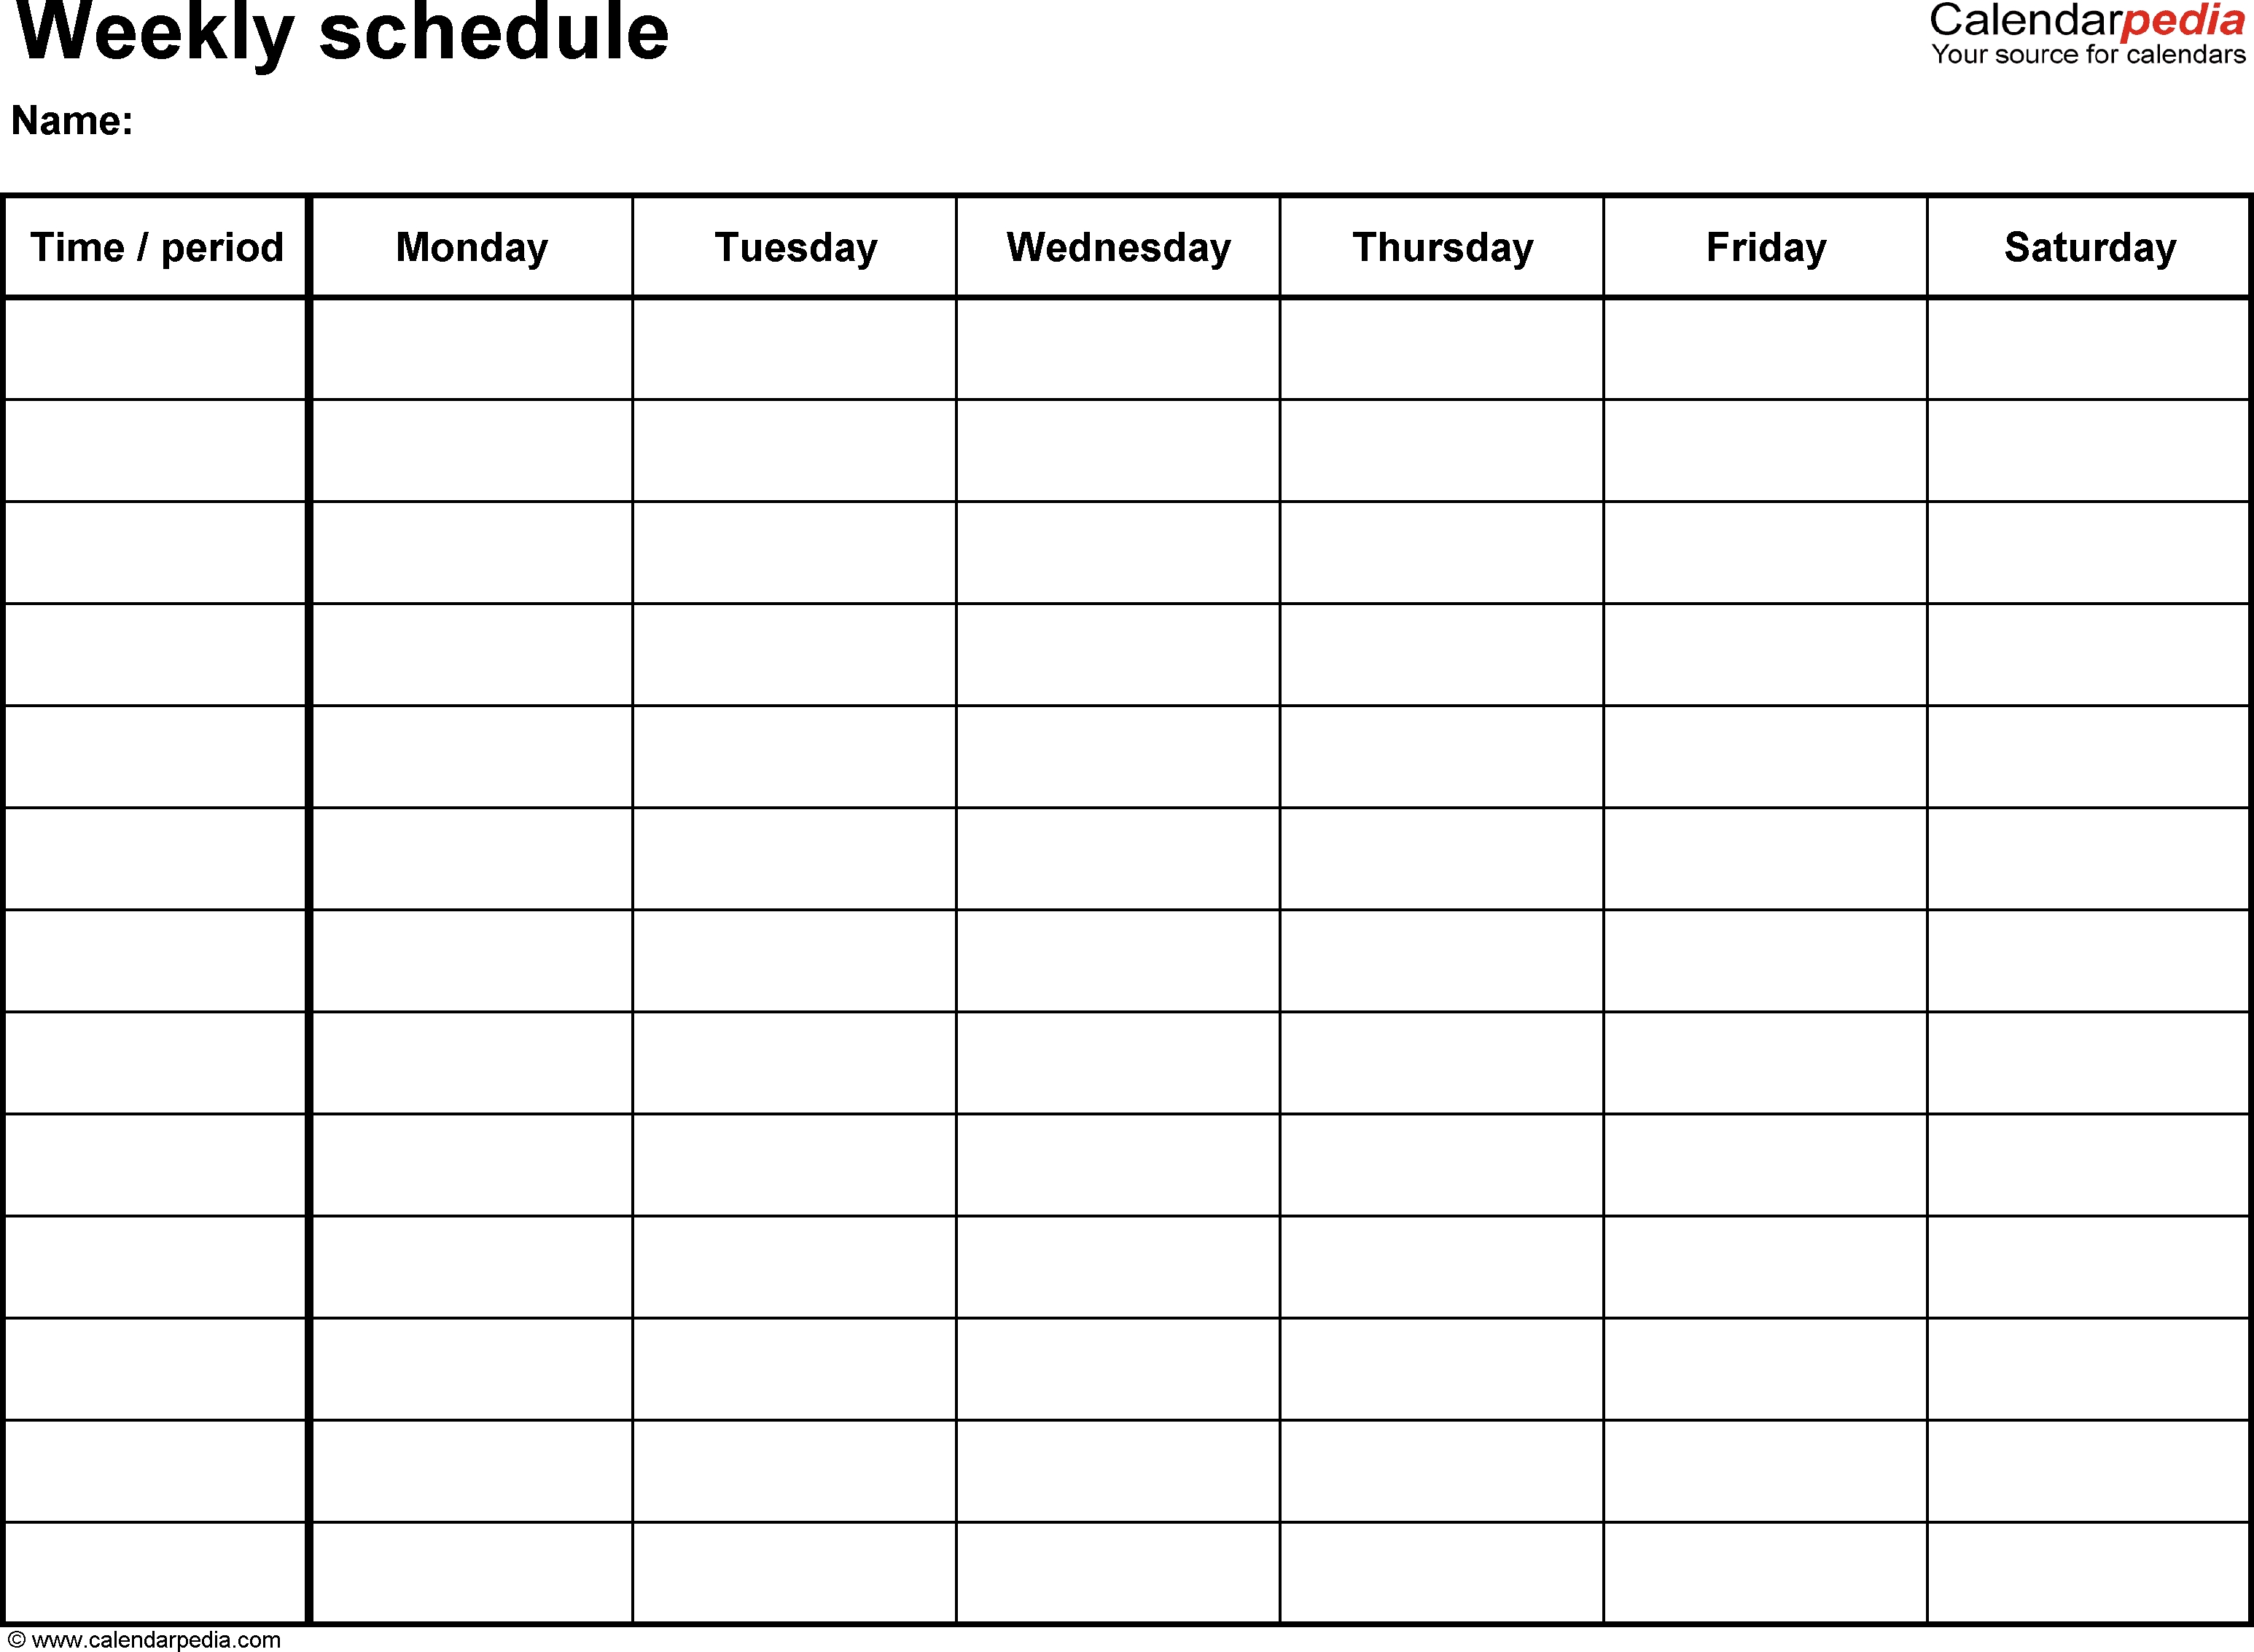 Free Weekly Schedule Templates For Word - 18 Templates pertaining to Calendar Monday Through Friday Schedule